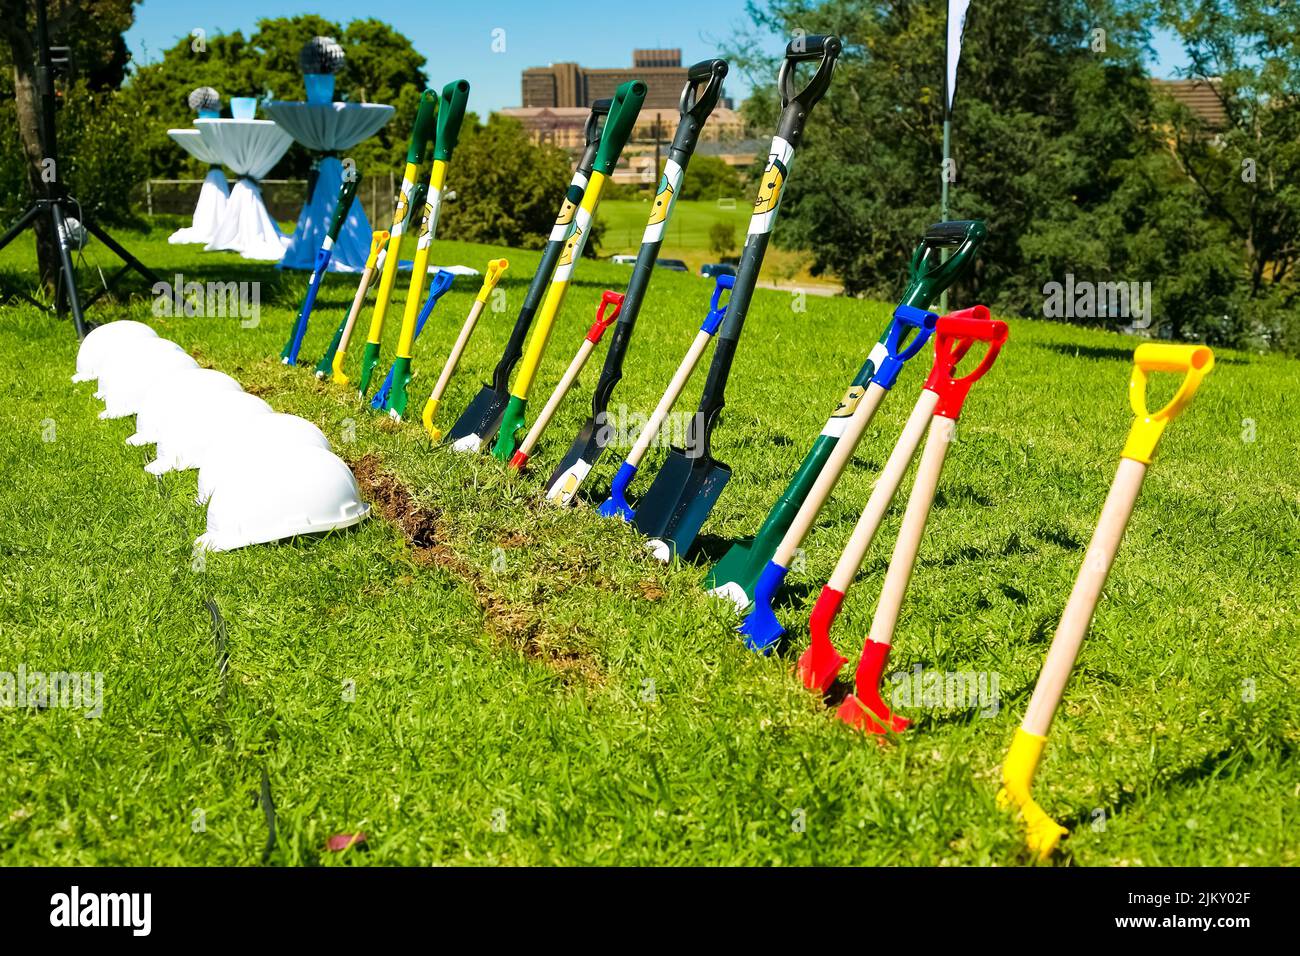 The spades and hard hats for the groundbreaking ceremonies. Johannesburg, South Africa - March 20, 2014: Stock Photo